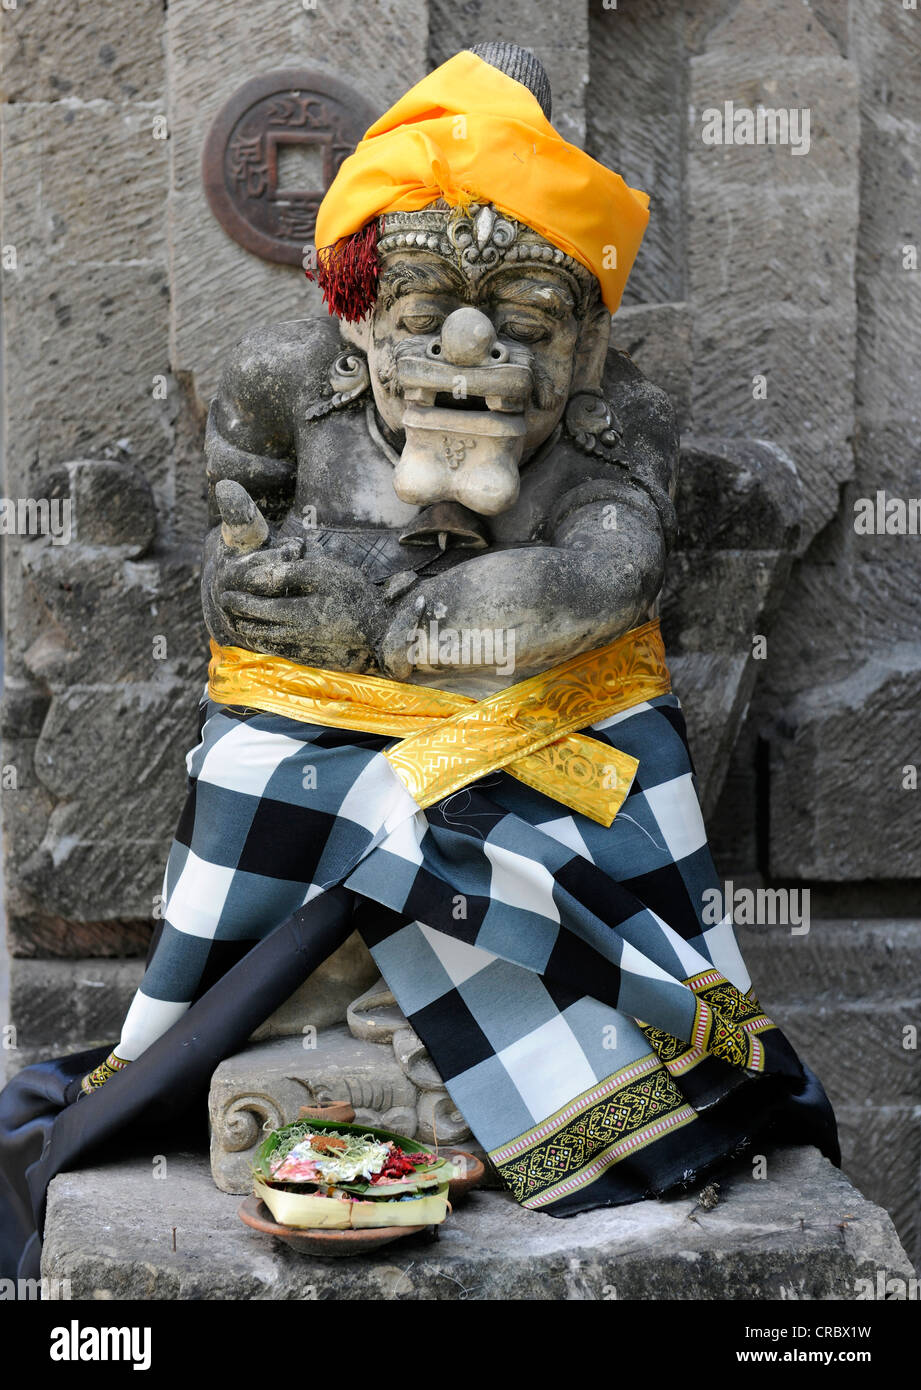 Religious sculpture with offerings, Denpasar, Bali, Indonesia, Southeast Asia Stock Photo